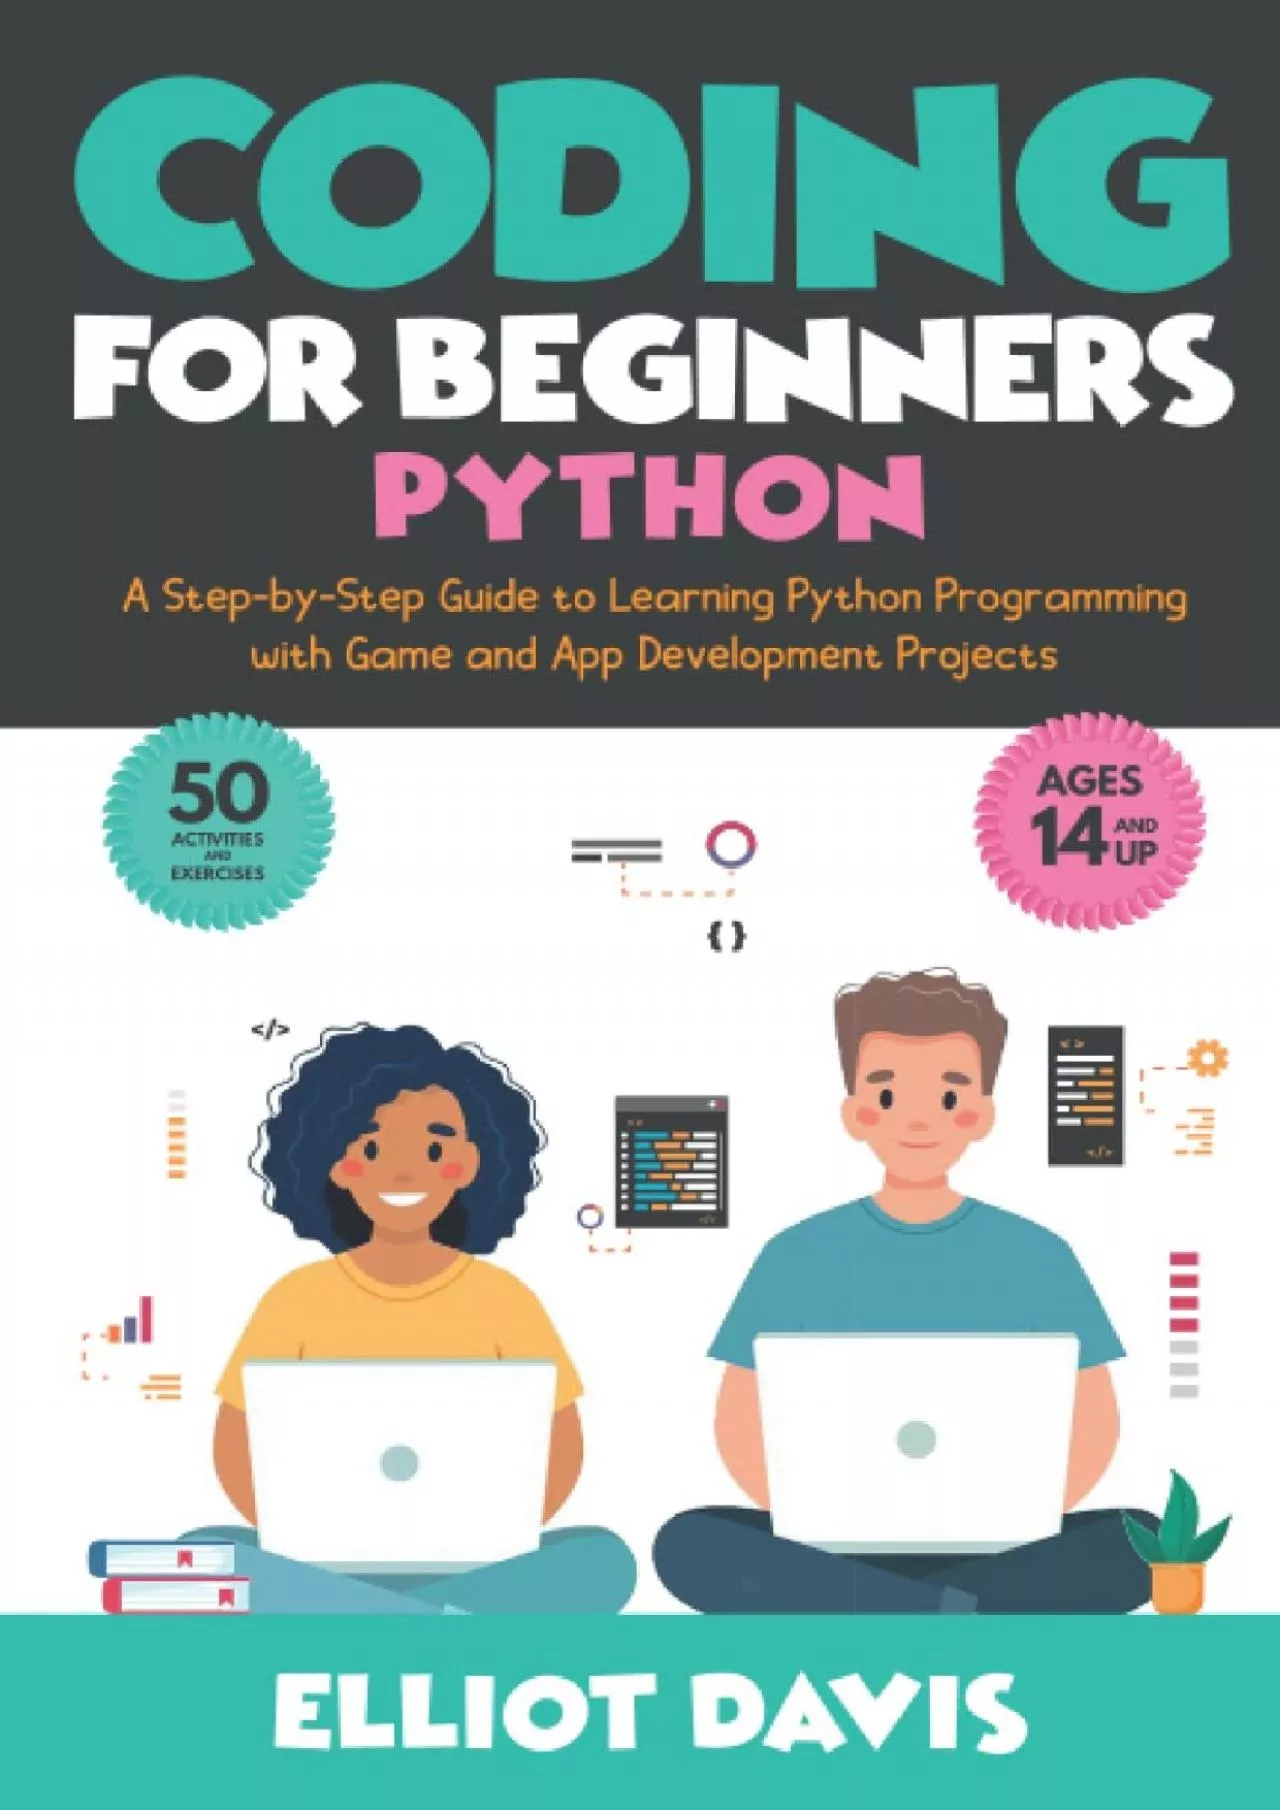 [DOWLOAD]-Coding for Beginners: Python: A Step-by-Step Guide to Learning Python Programing